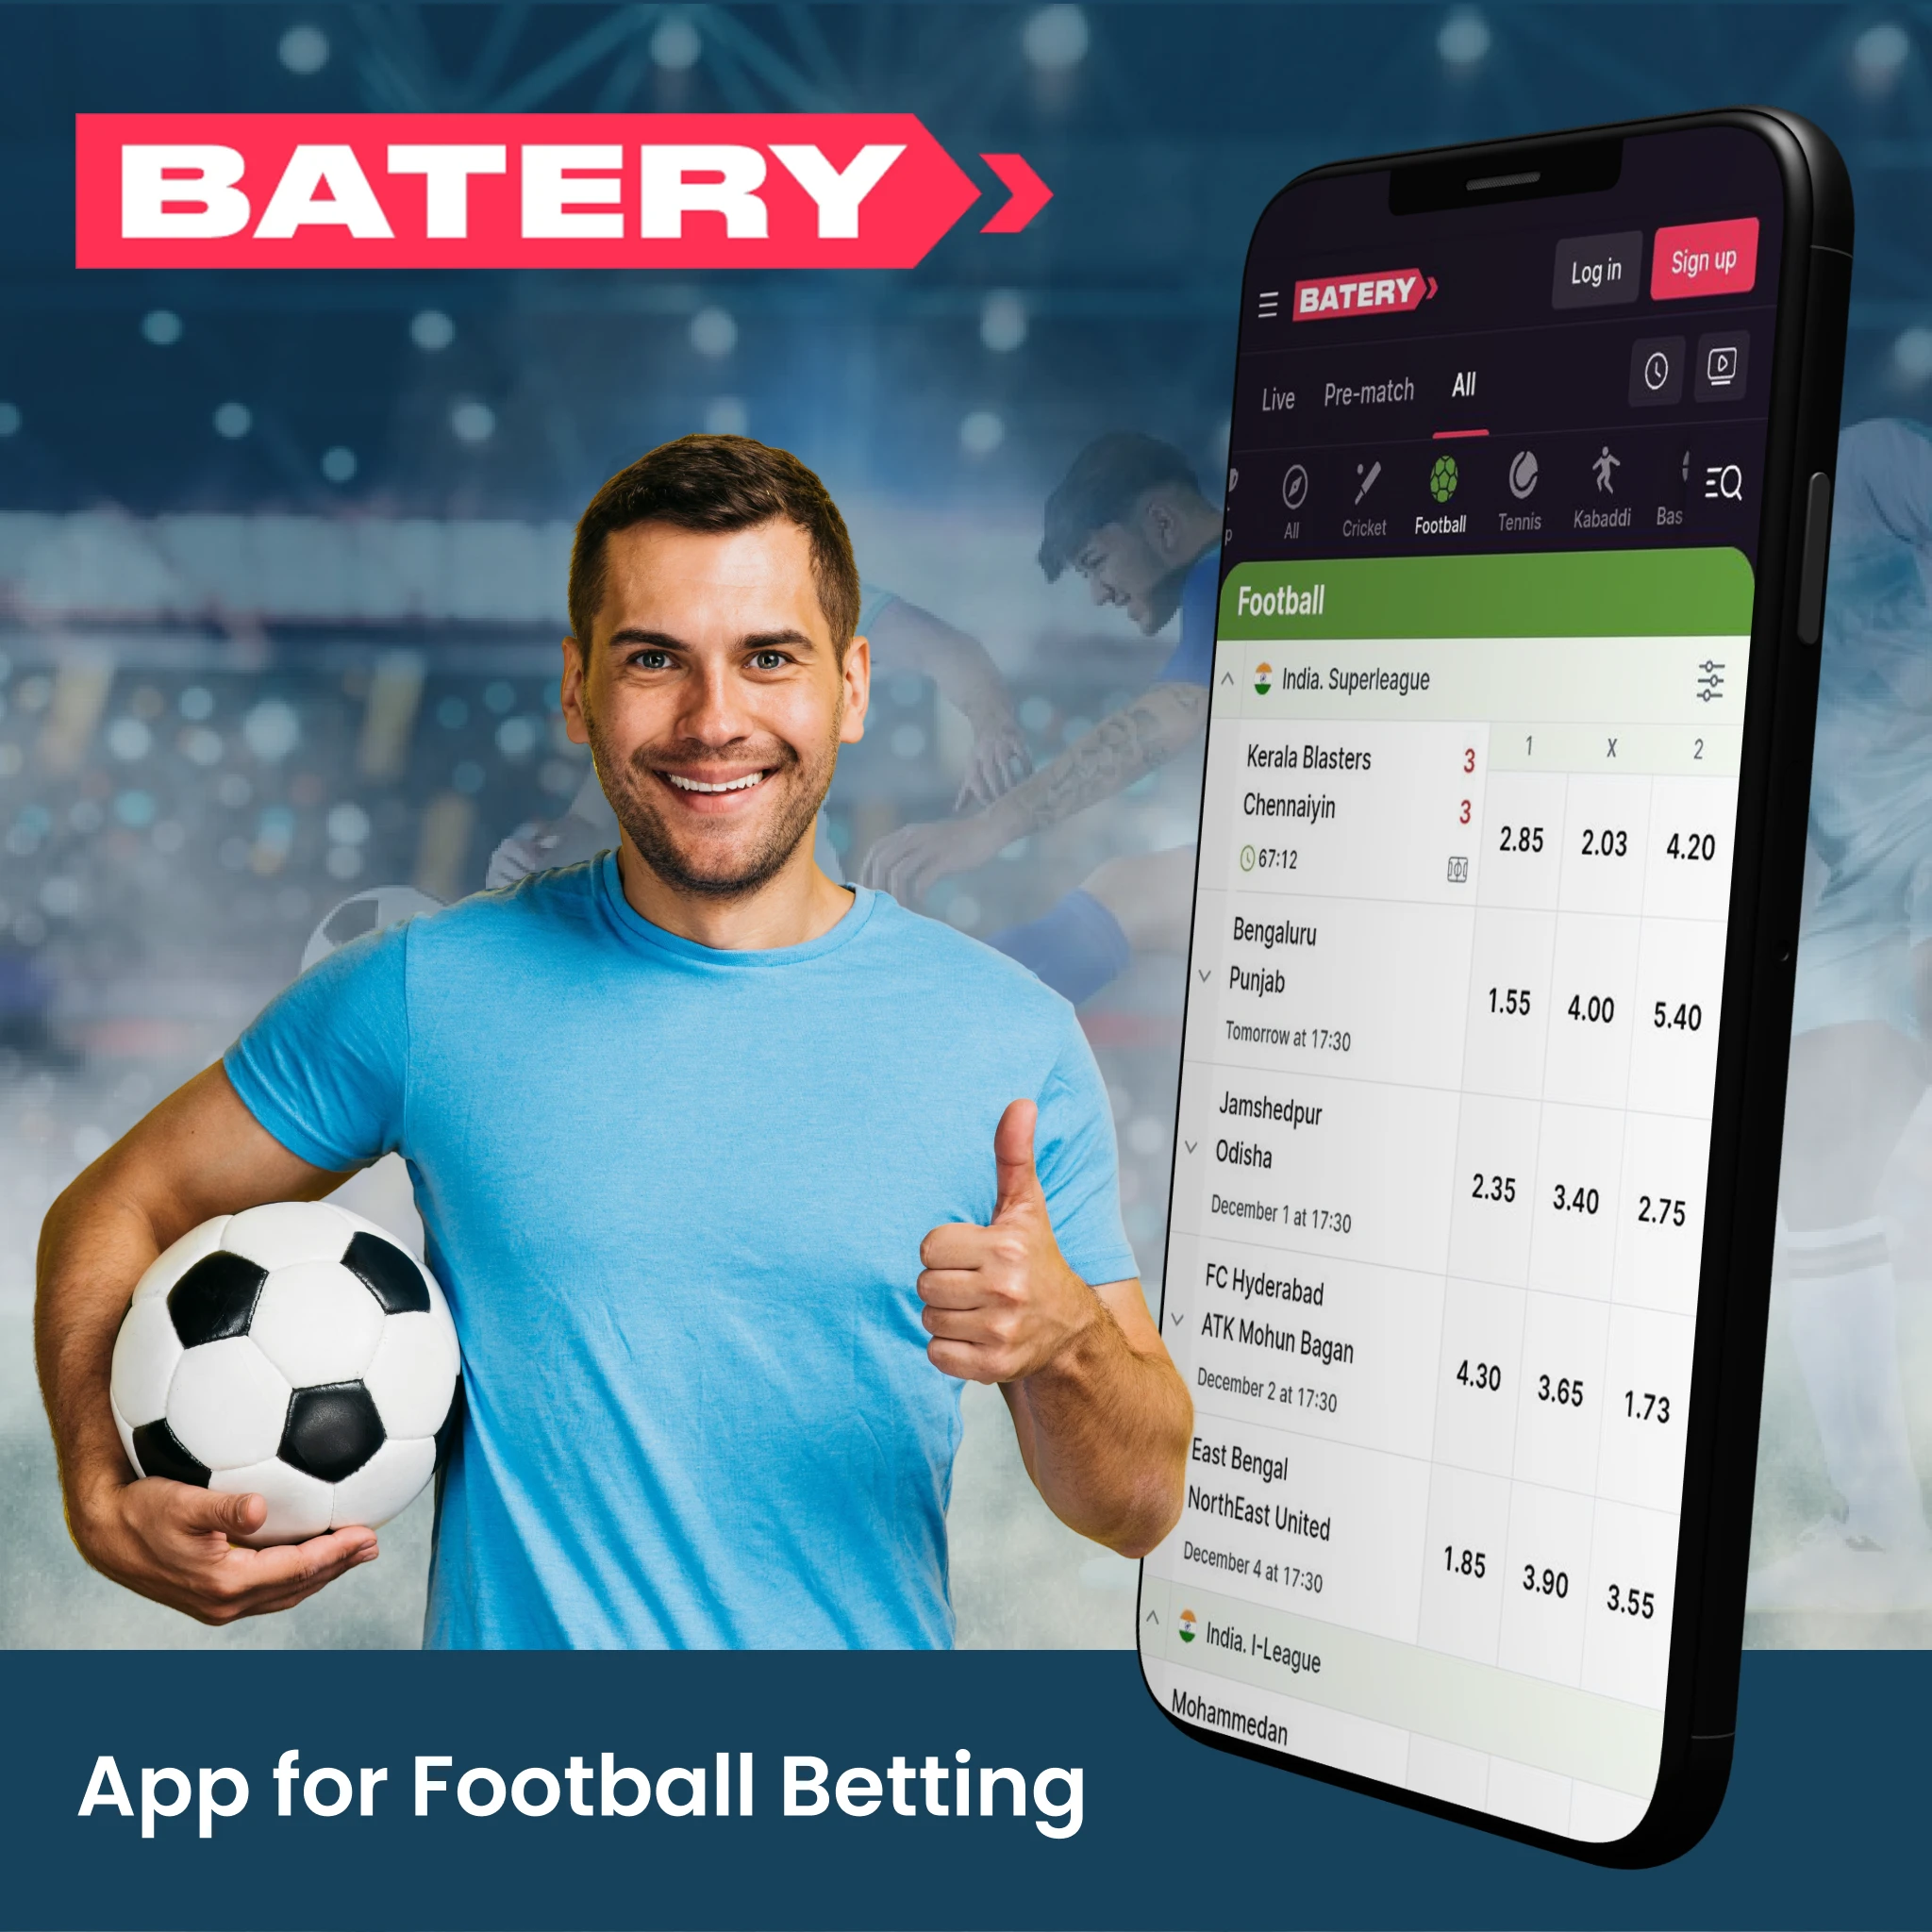 Batery designed a mobile app for betting on football.